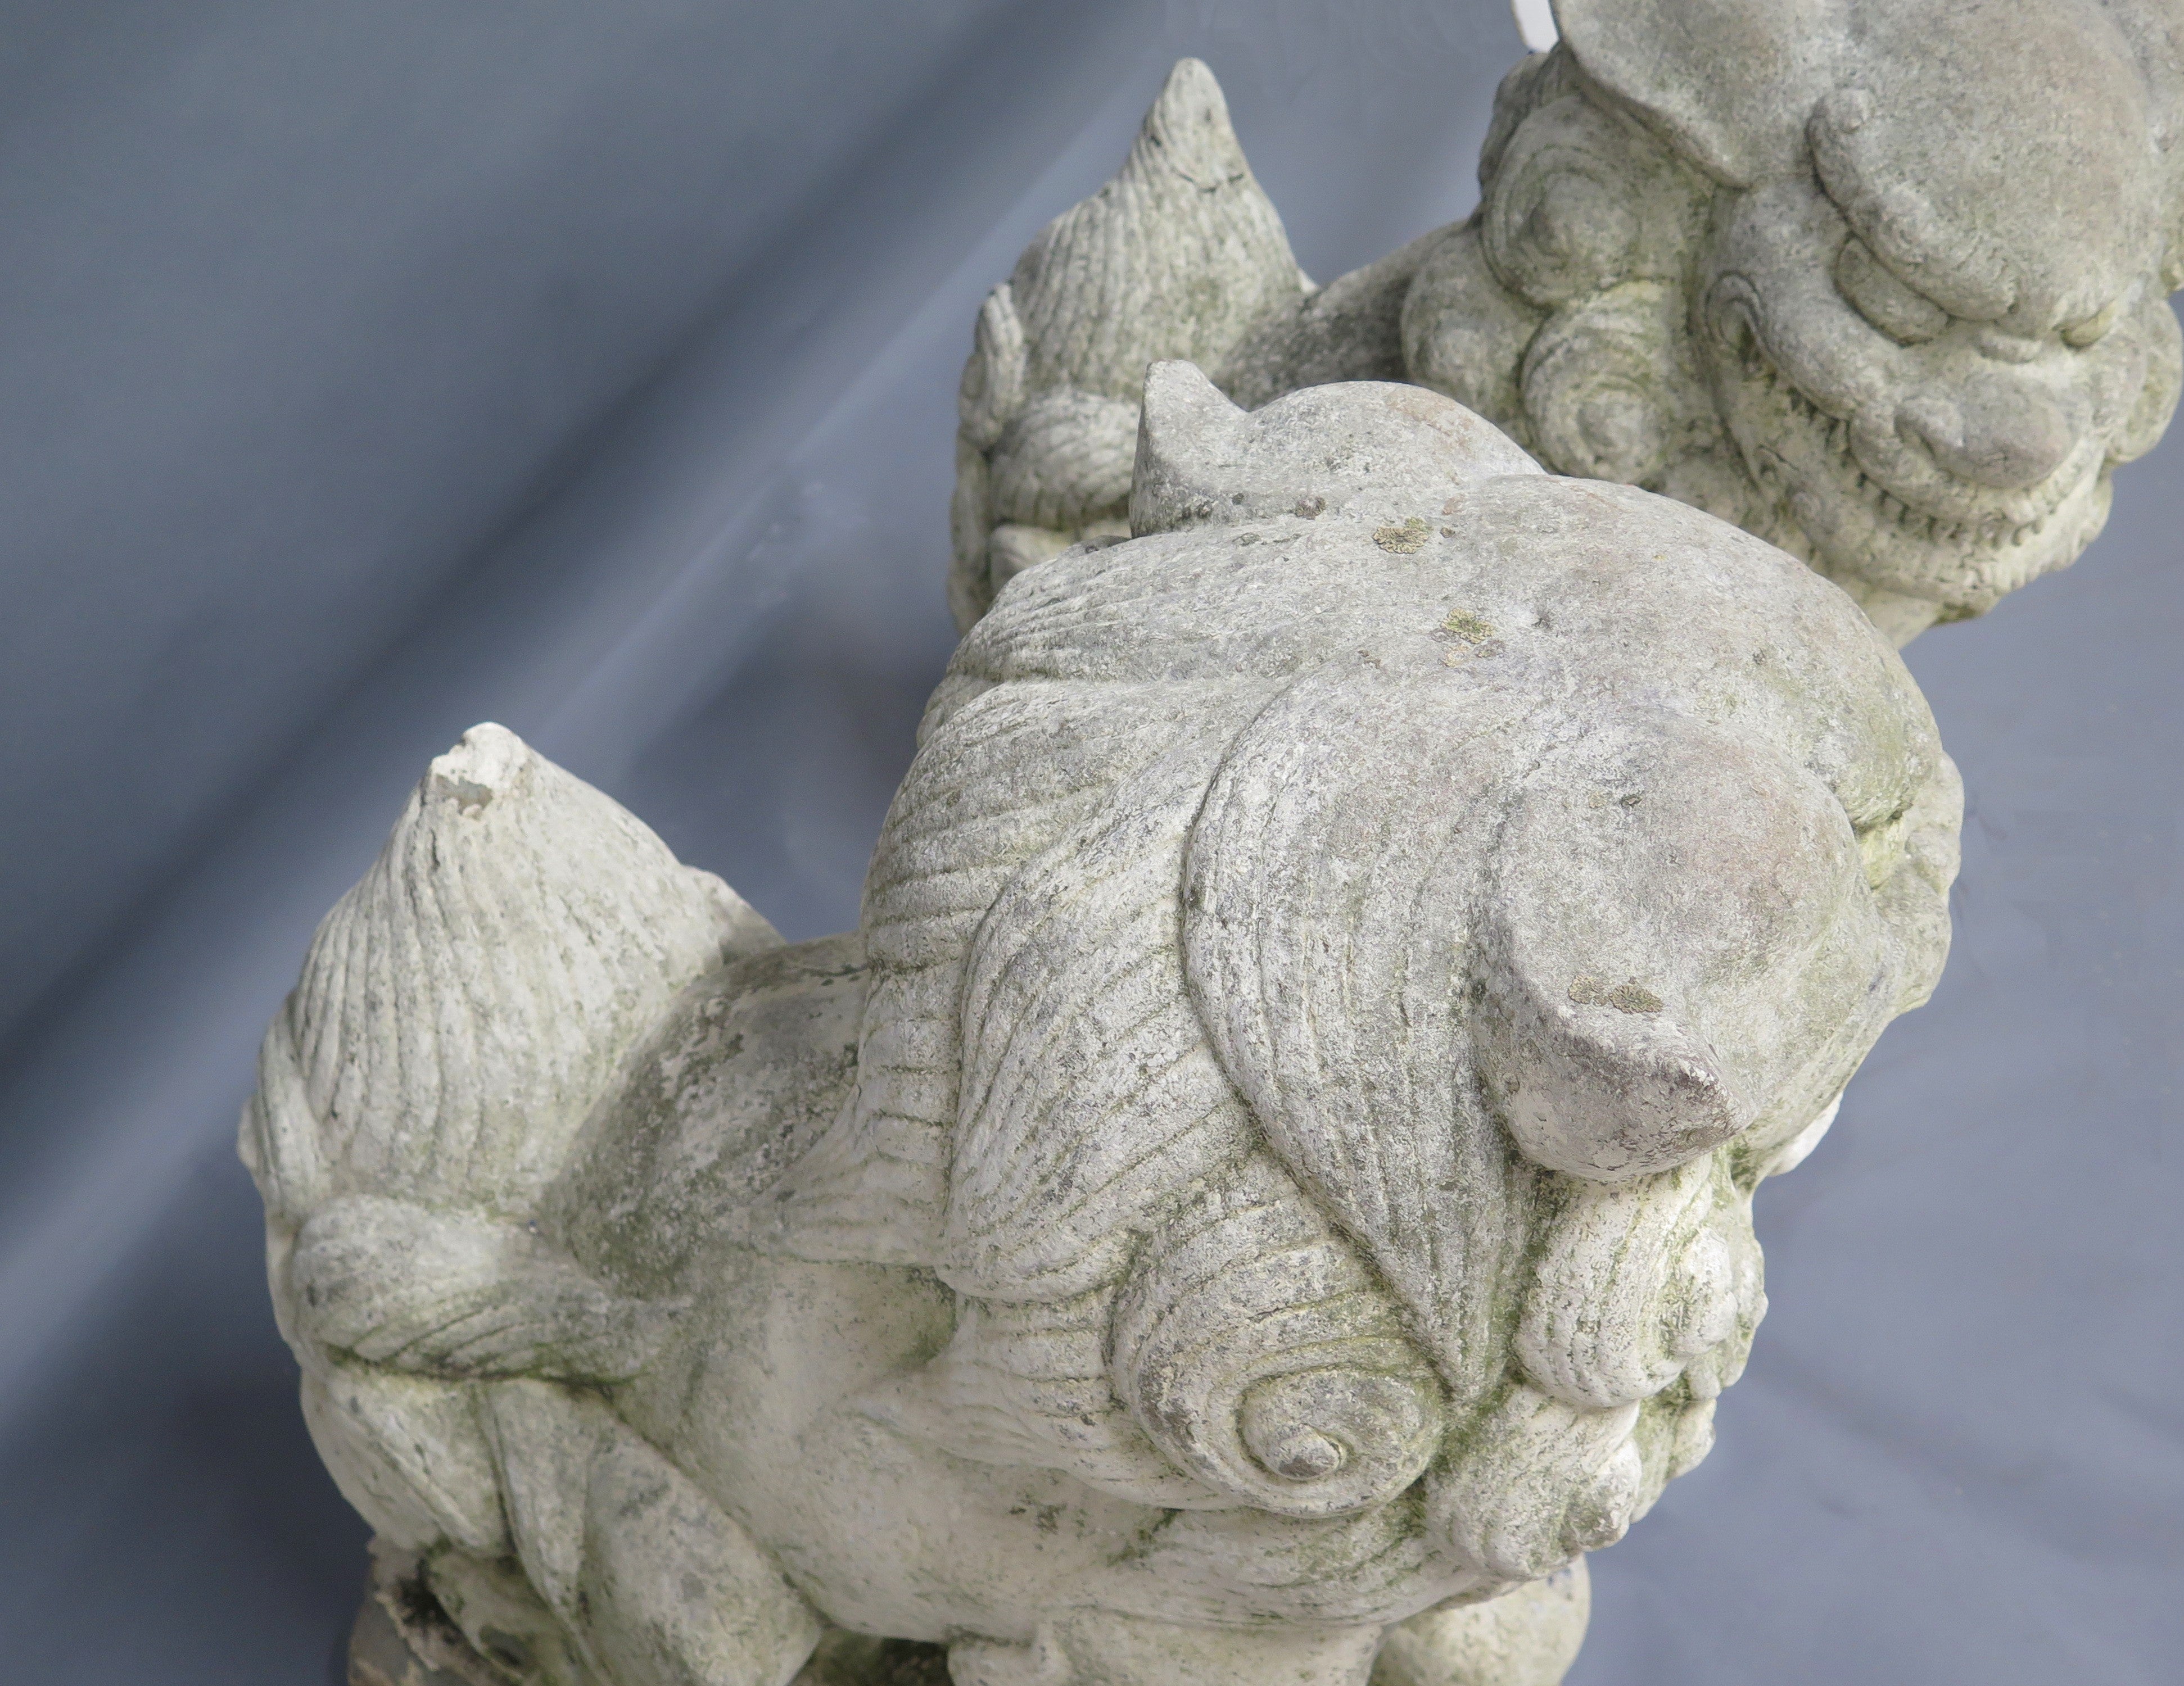 Pair of Large Scale Carved Stone Chinese Foo Dogs / Temple Lions